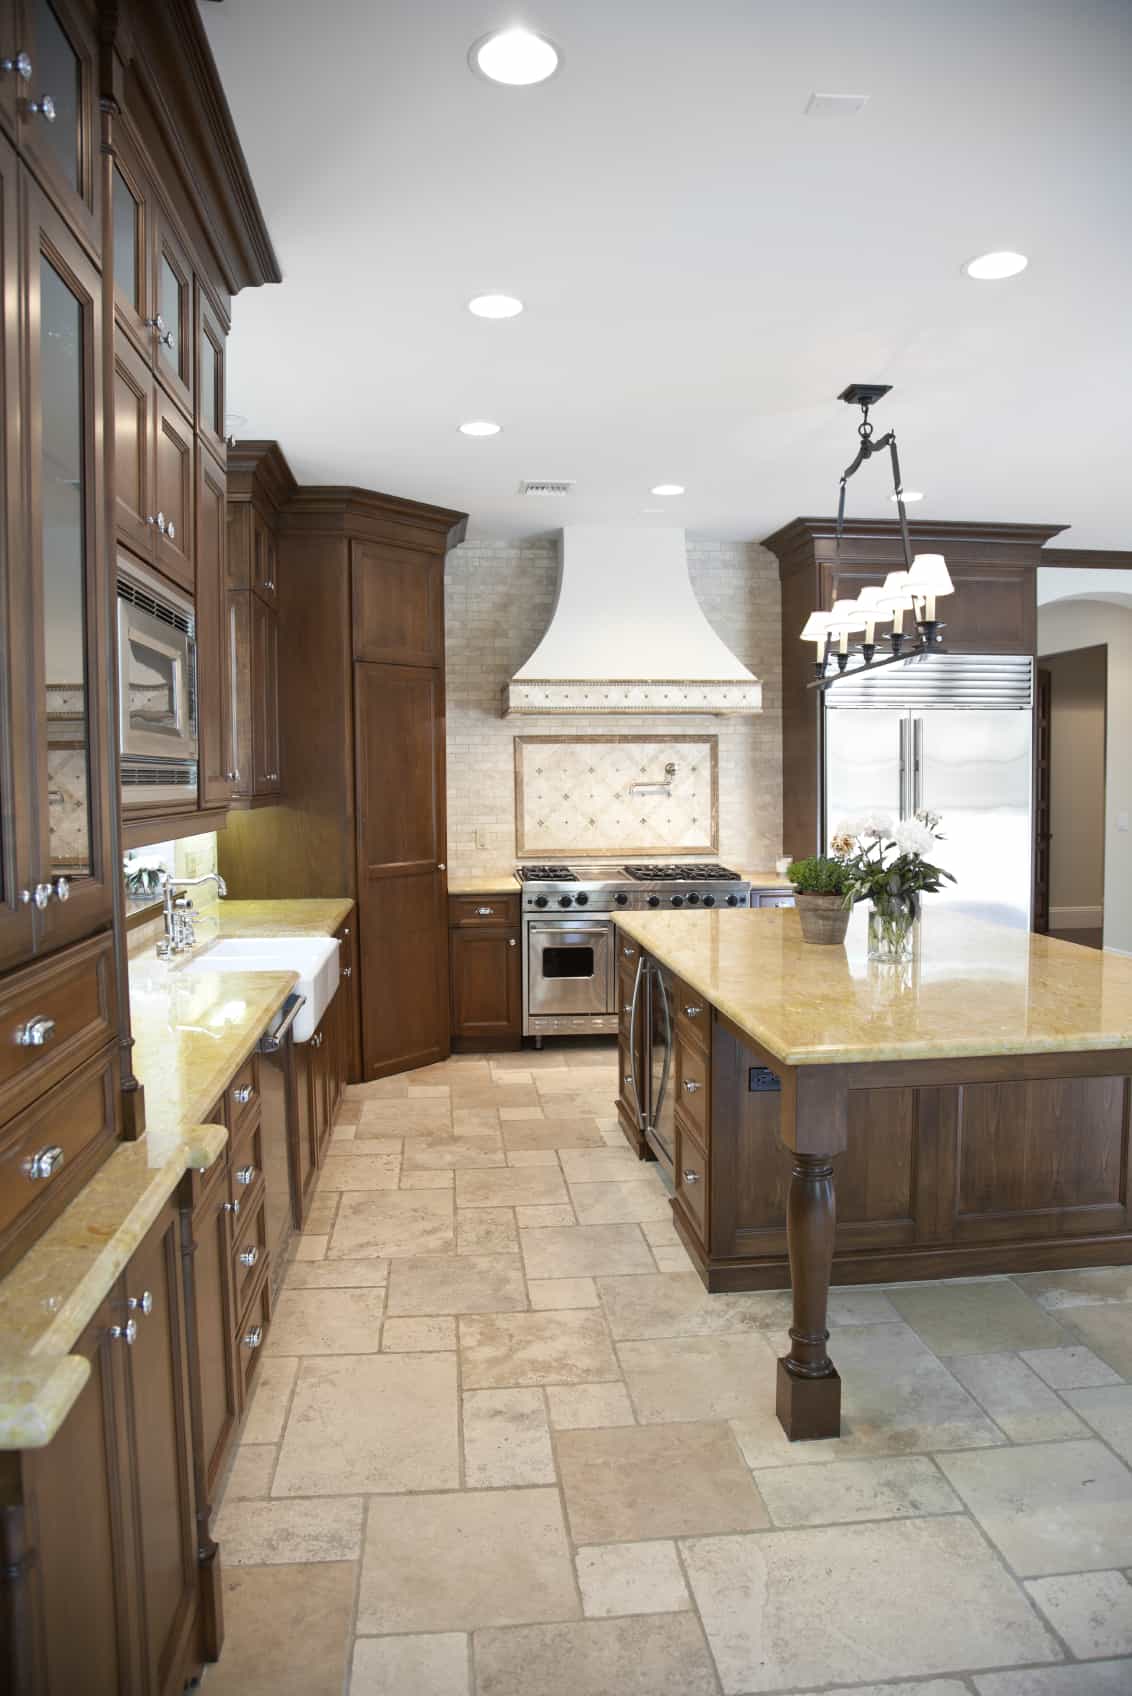 Light stone flooring makes the natural wooden cabinets and island pop even more.